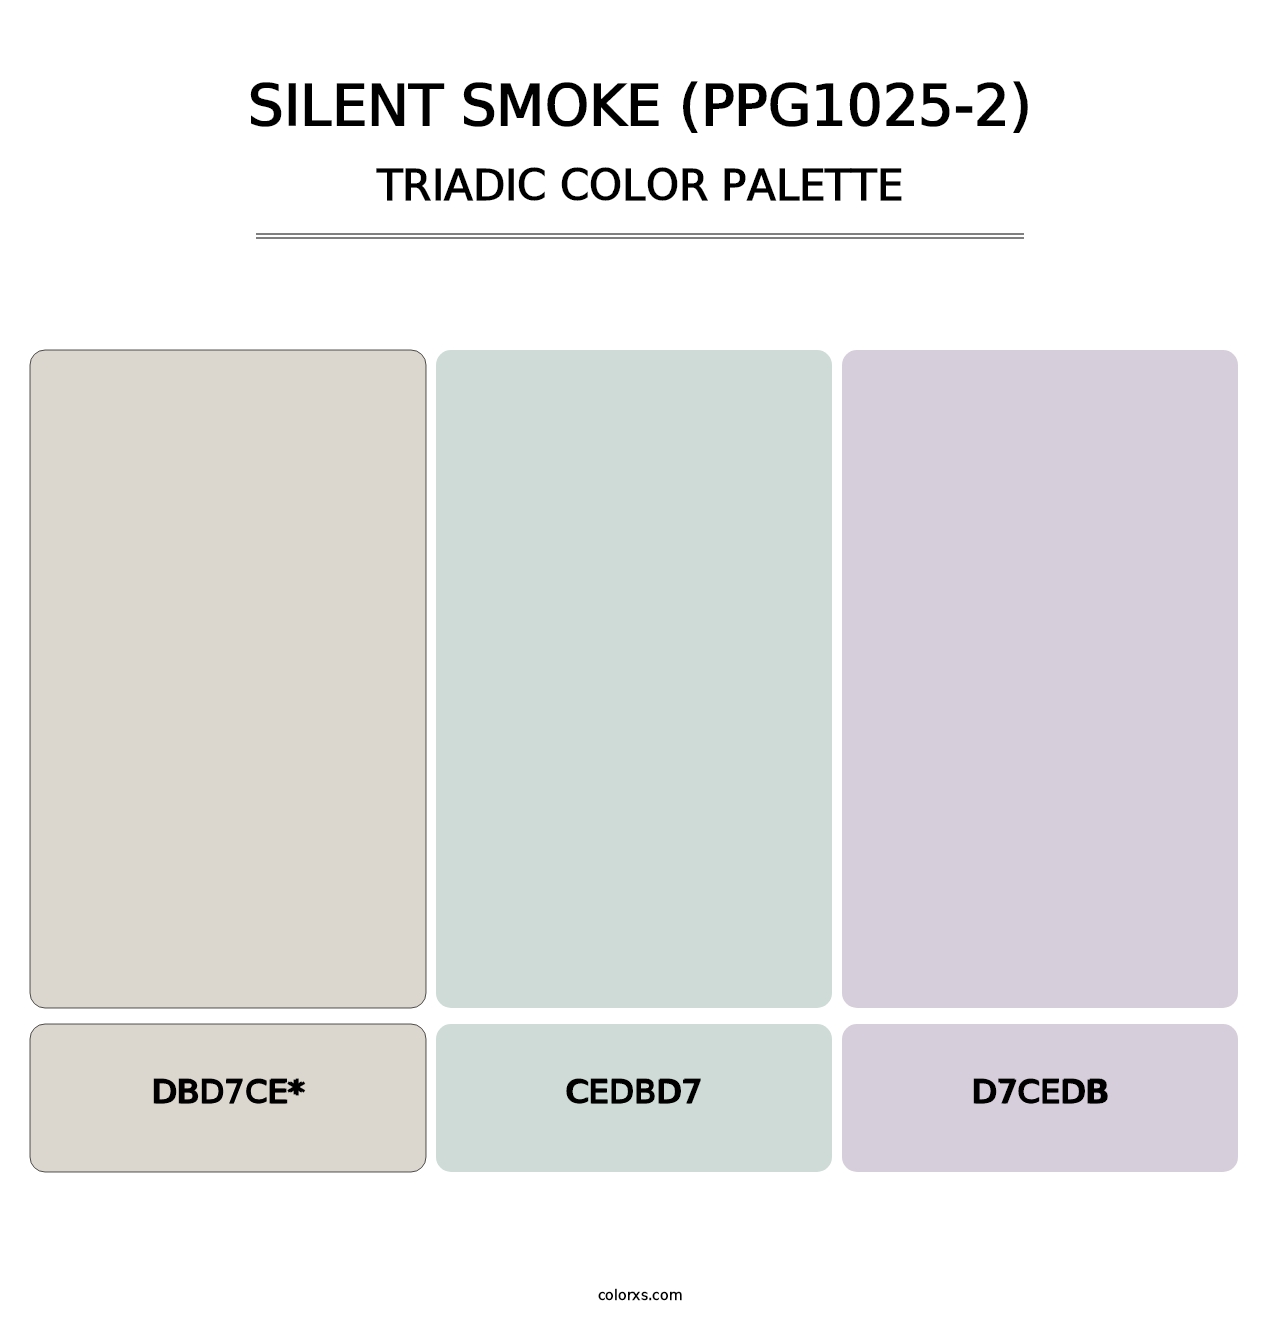 Silent Smoke (PPG1025-2) - Triadic Color Palette